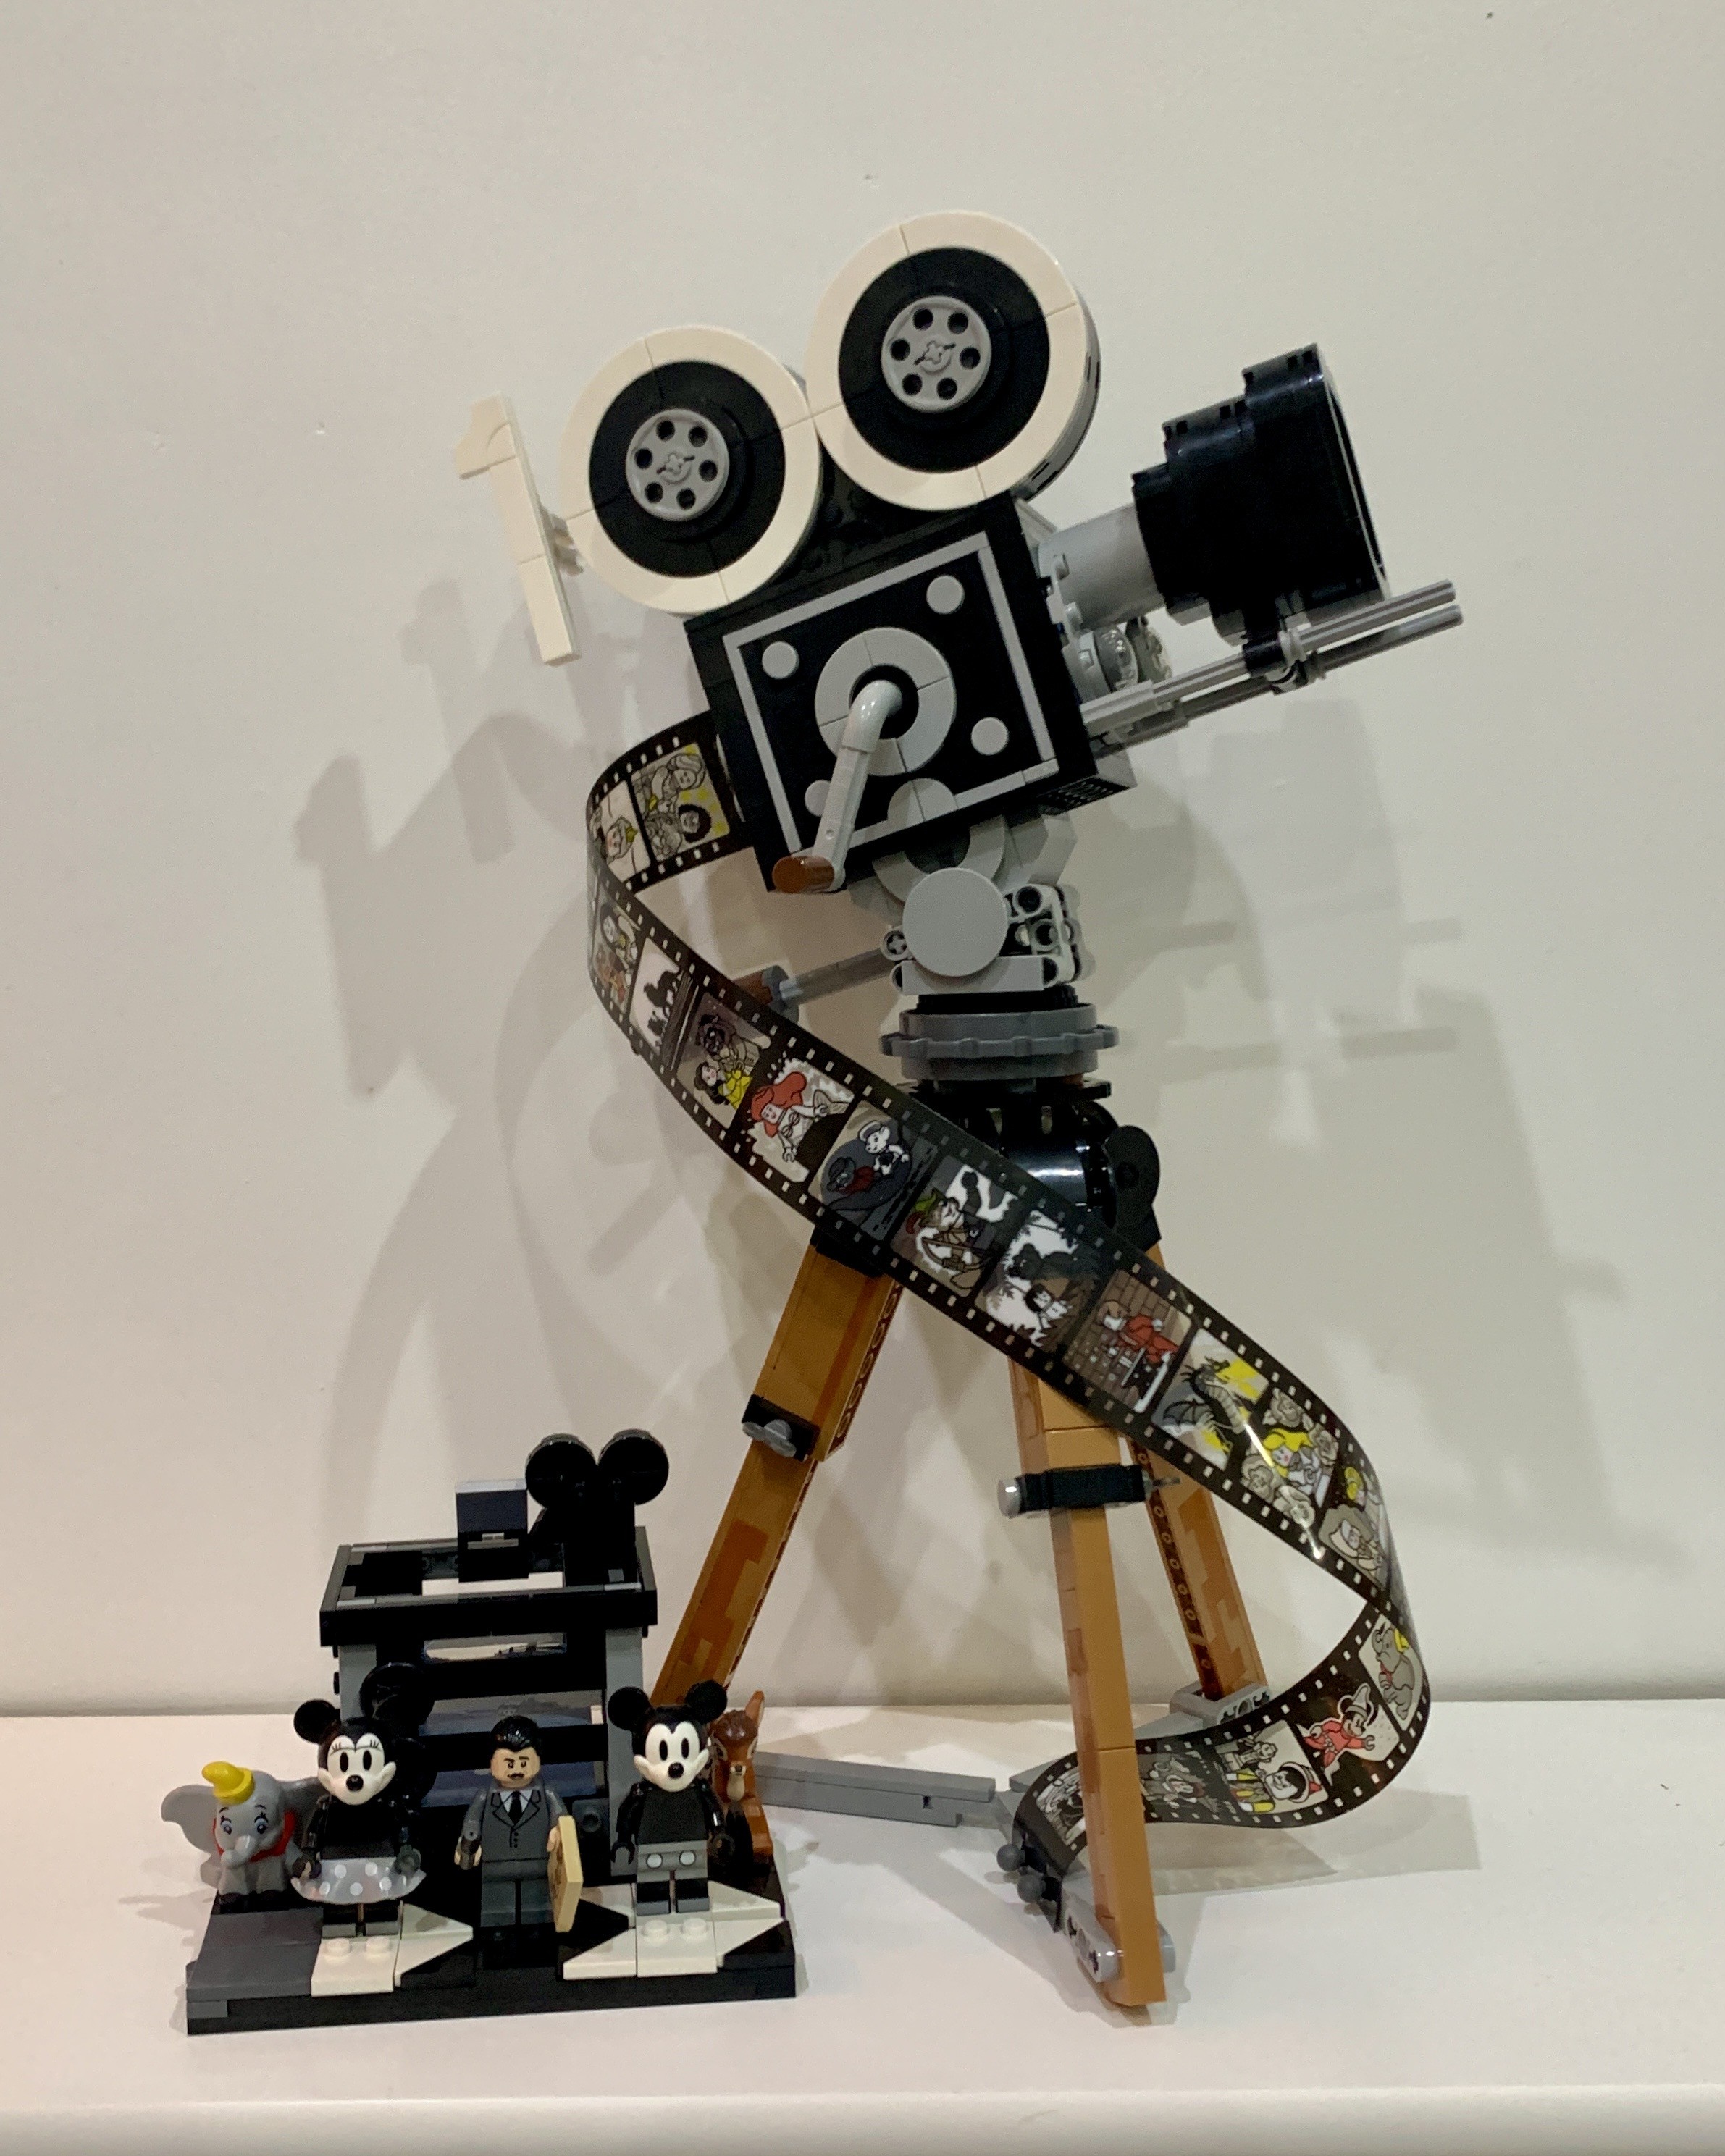 Lego Walt Disney Tribute Camera. It is an old fashioned film camera on a wooden tripod. The reels on top of the camera make two 0’s, to the left of them is a 1 so the top of the camera reads 100. Coming out of the back of the camera and wrapping around the legs is a film strip featuring frames from many of Disney films. To the left of the camera and tripod is a small model of a multiplane camera. In front of that are 5 minifigures representing Walt Disney, Mickey and Minnie Mouse in black and white, Dumbo and Bambi. The minifigures and multiplane camera are sat on a black and white clapperboard as a base.